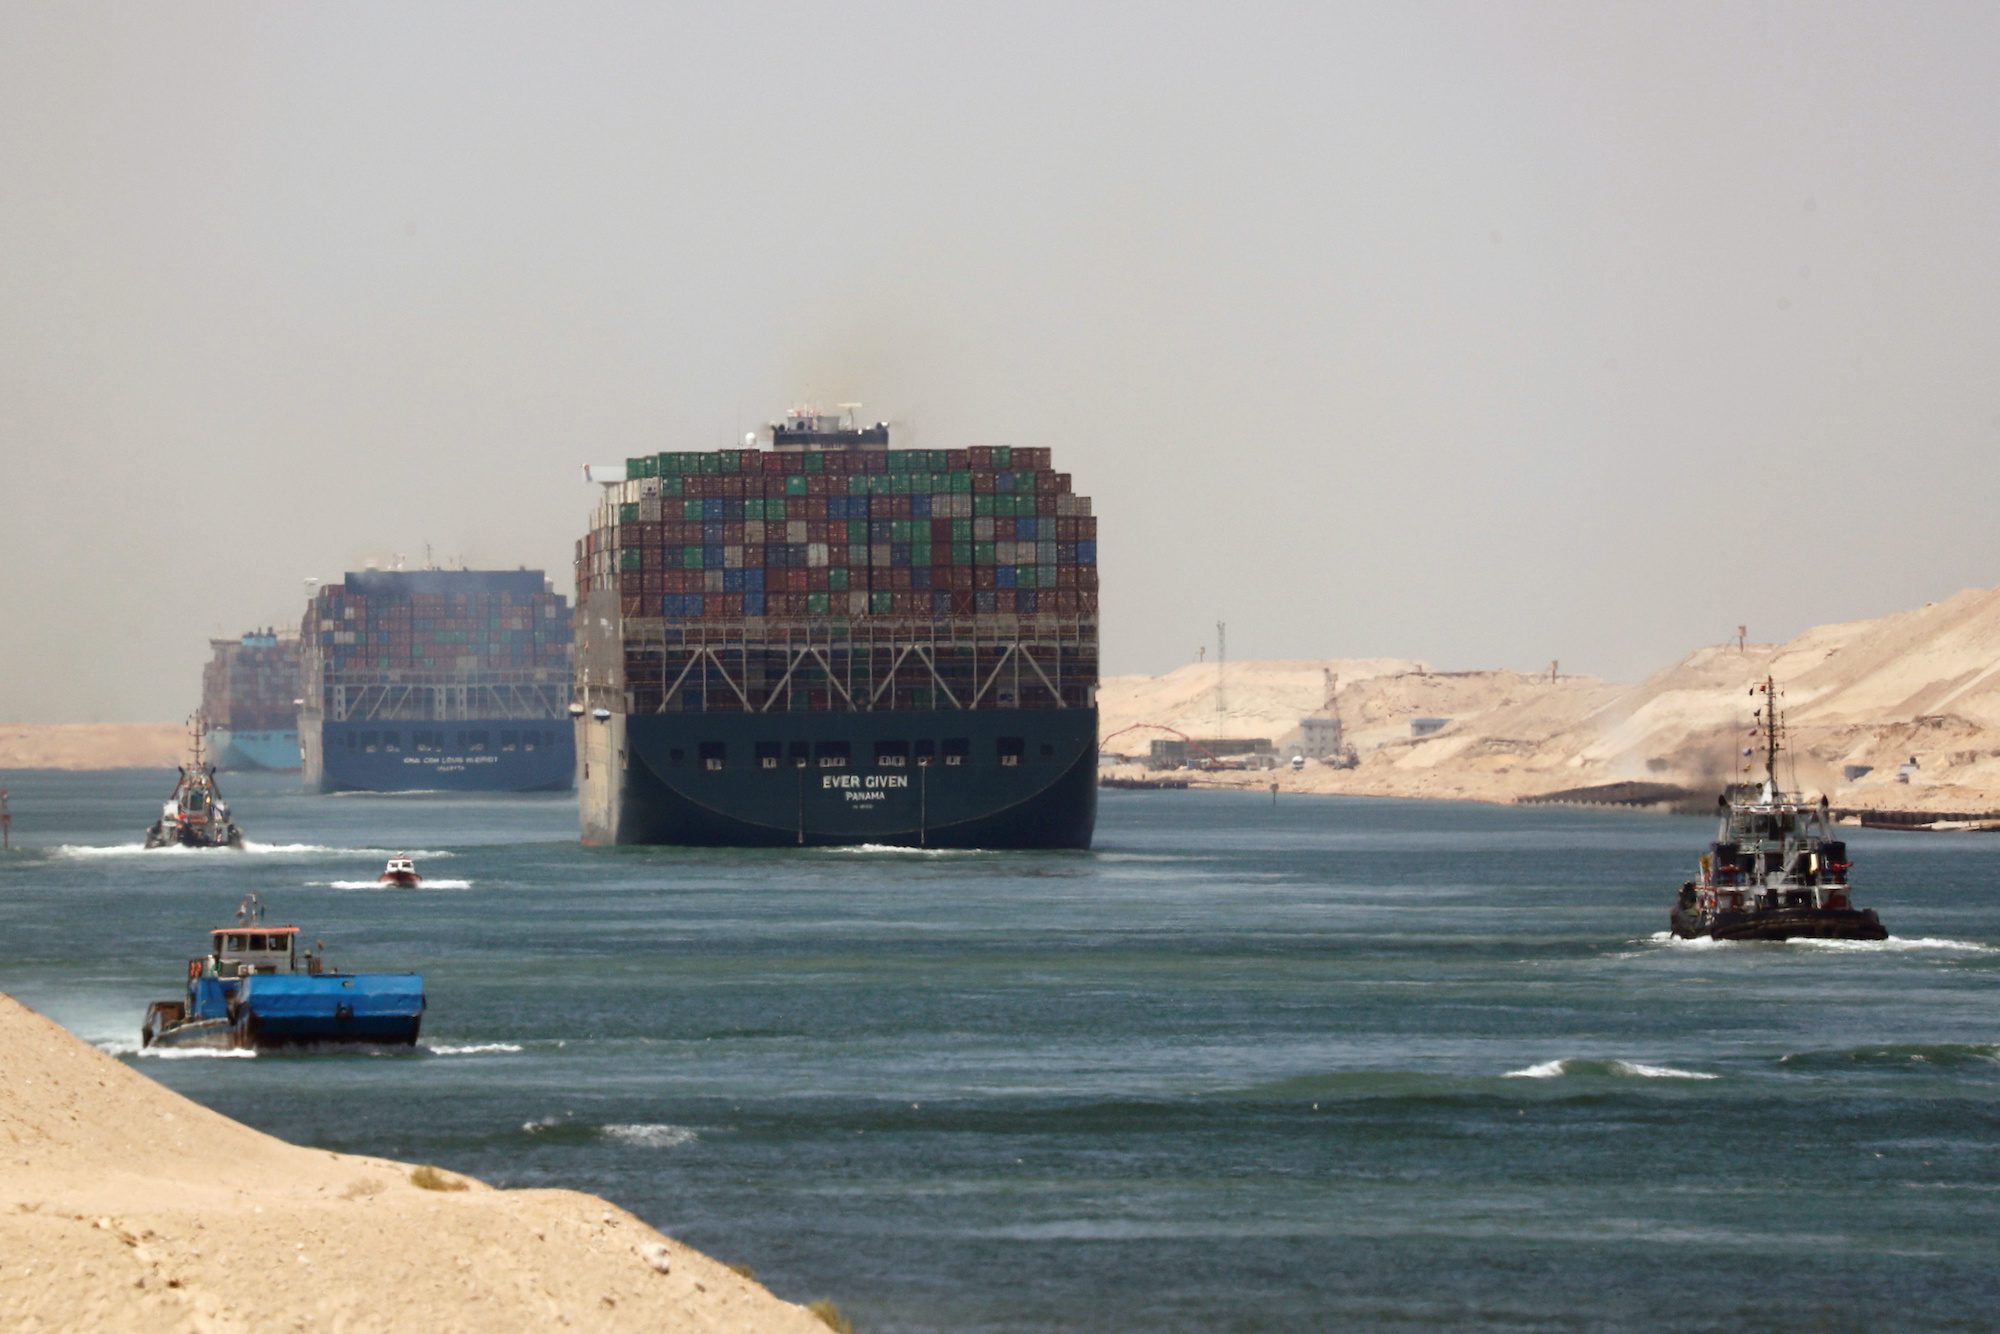 Suez Canal to Hike Ship Tolls by 6% Starting in 2022